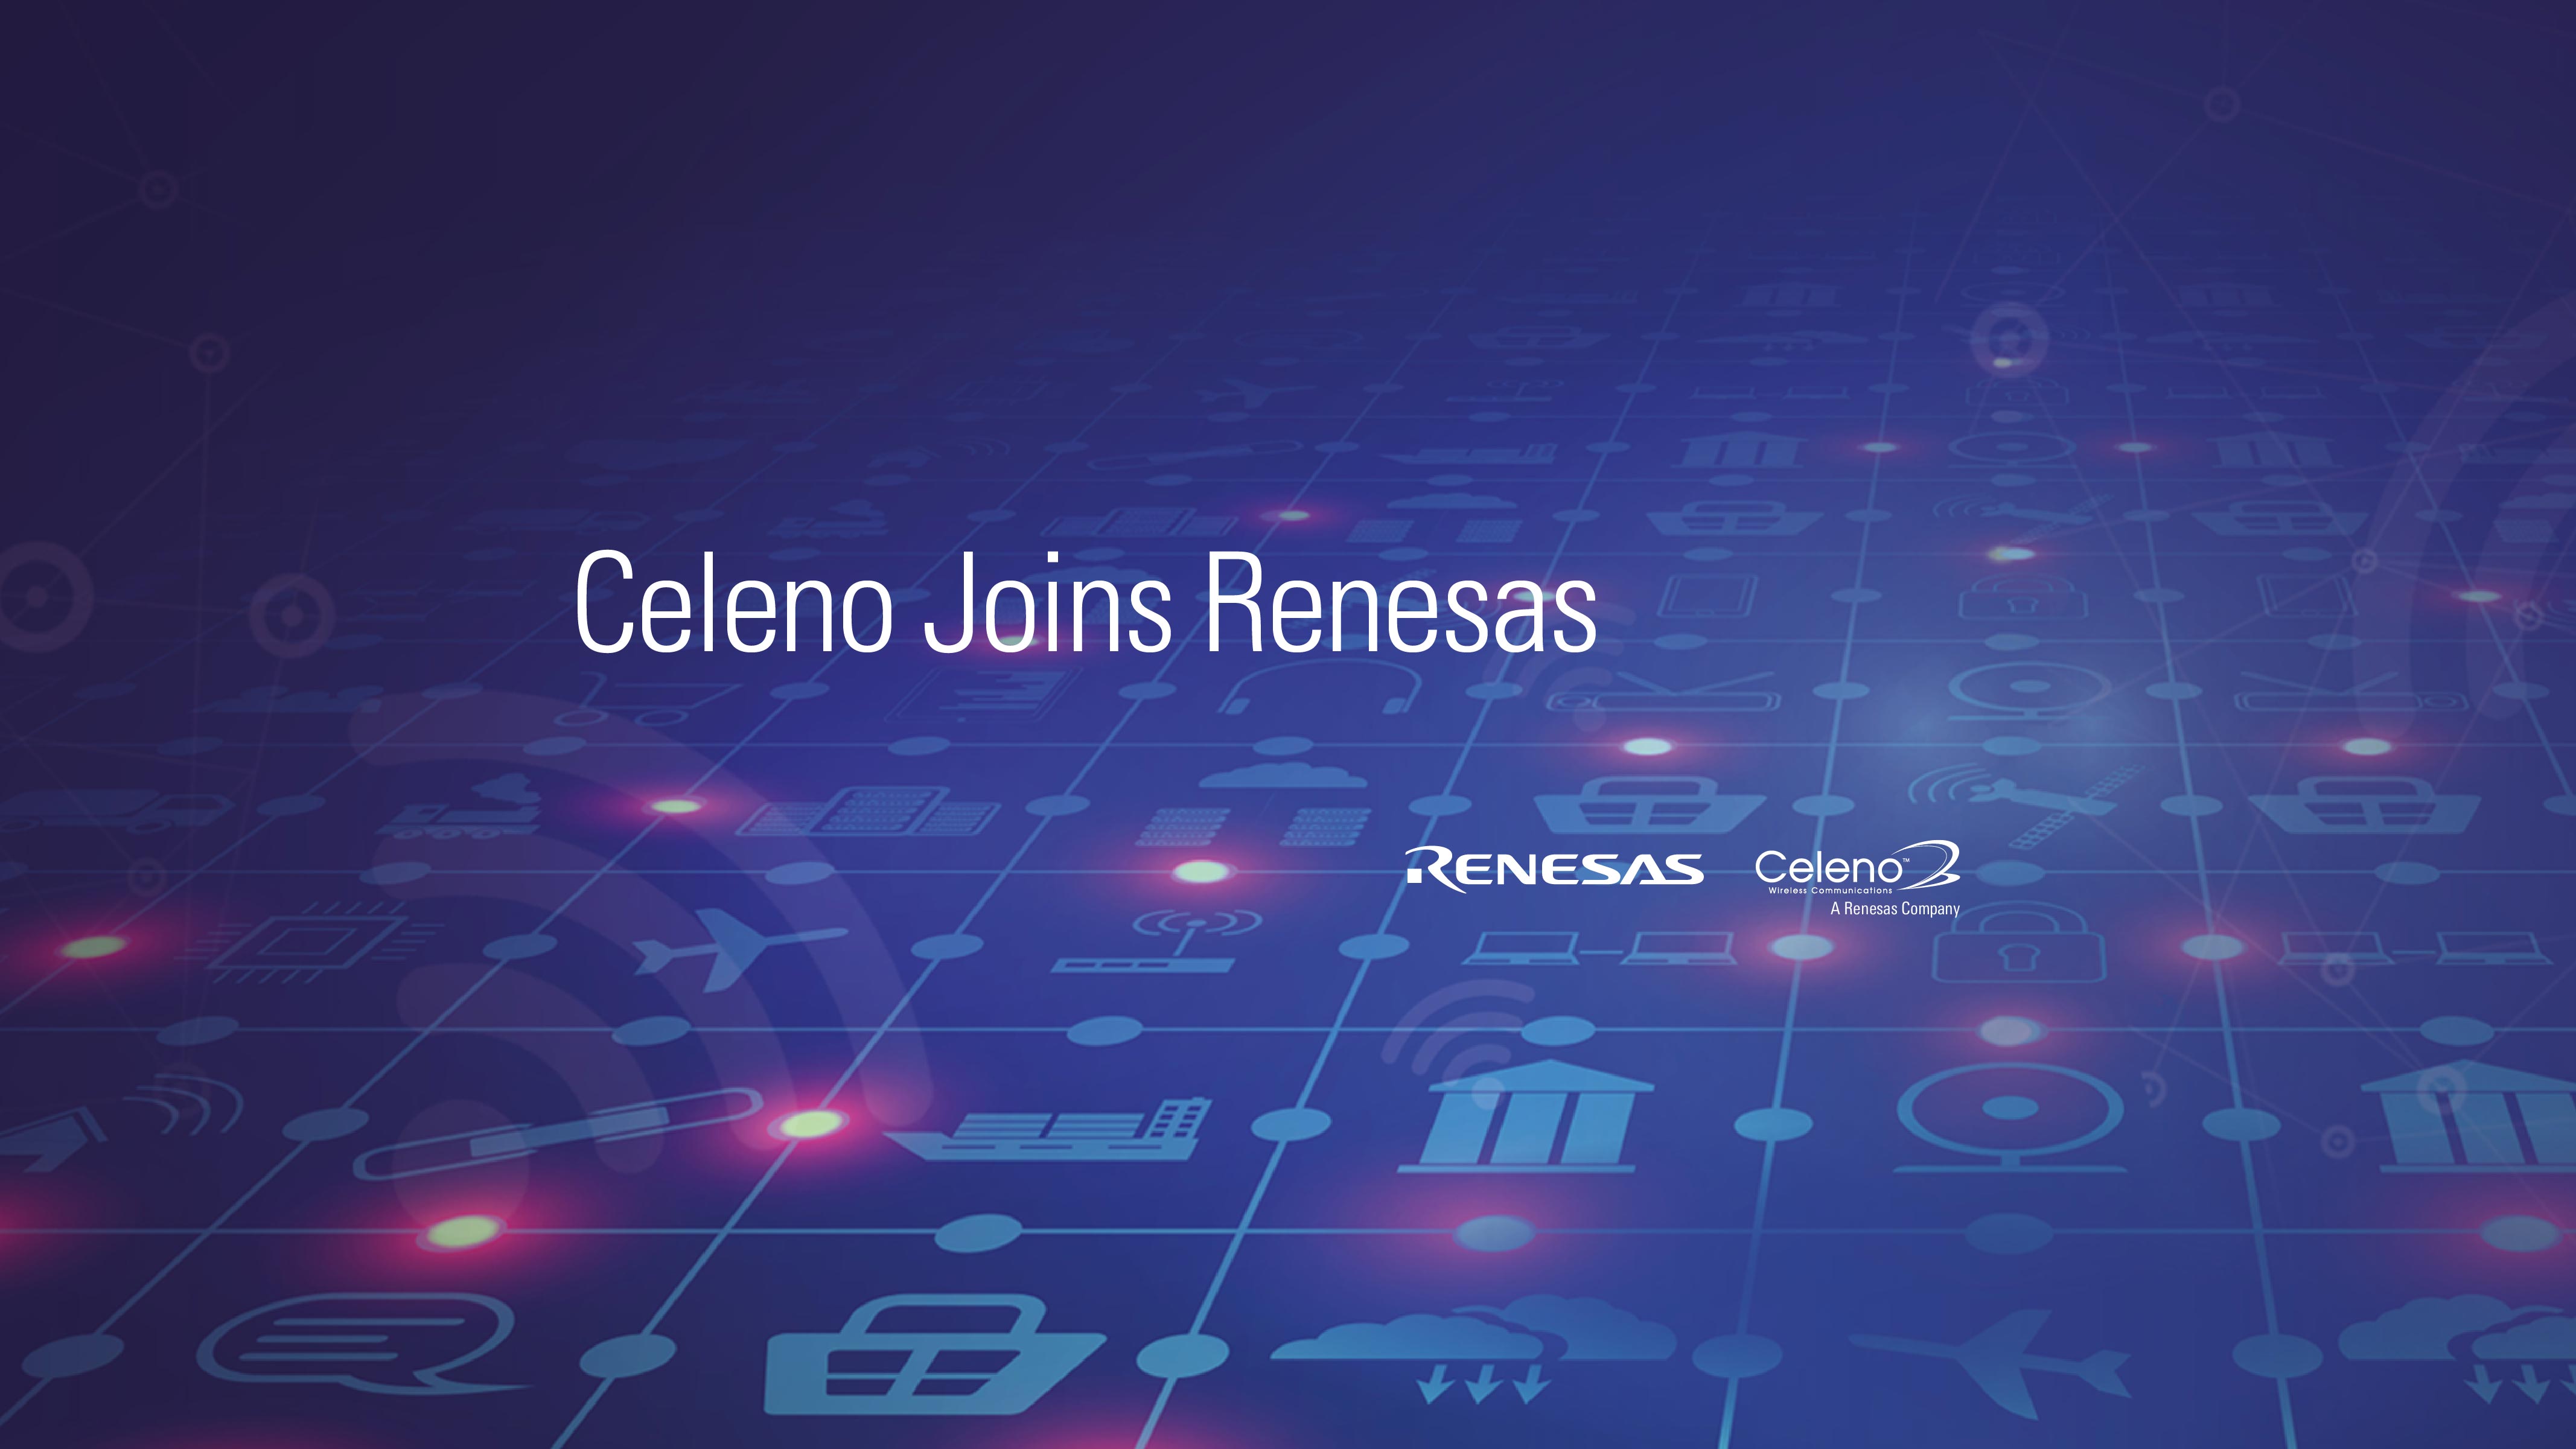 Renesas Completes Acquisition of Celeno